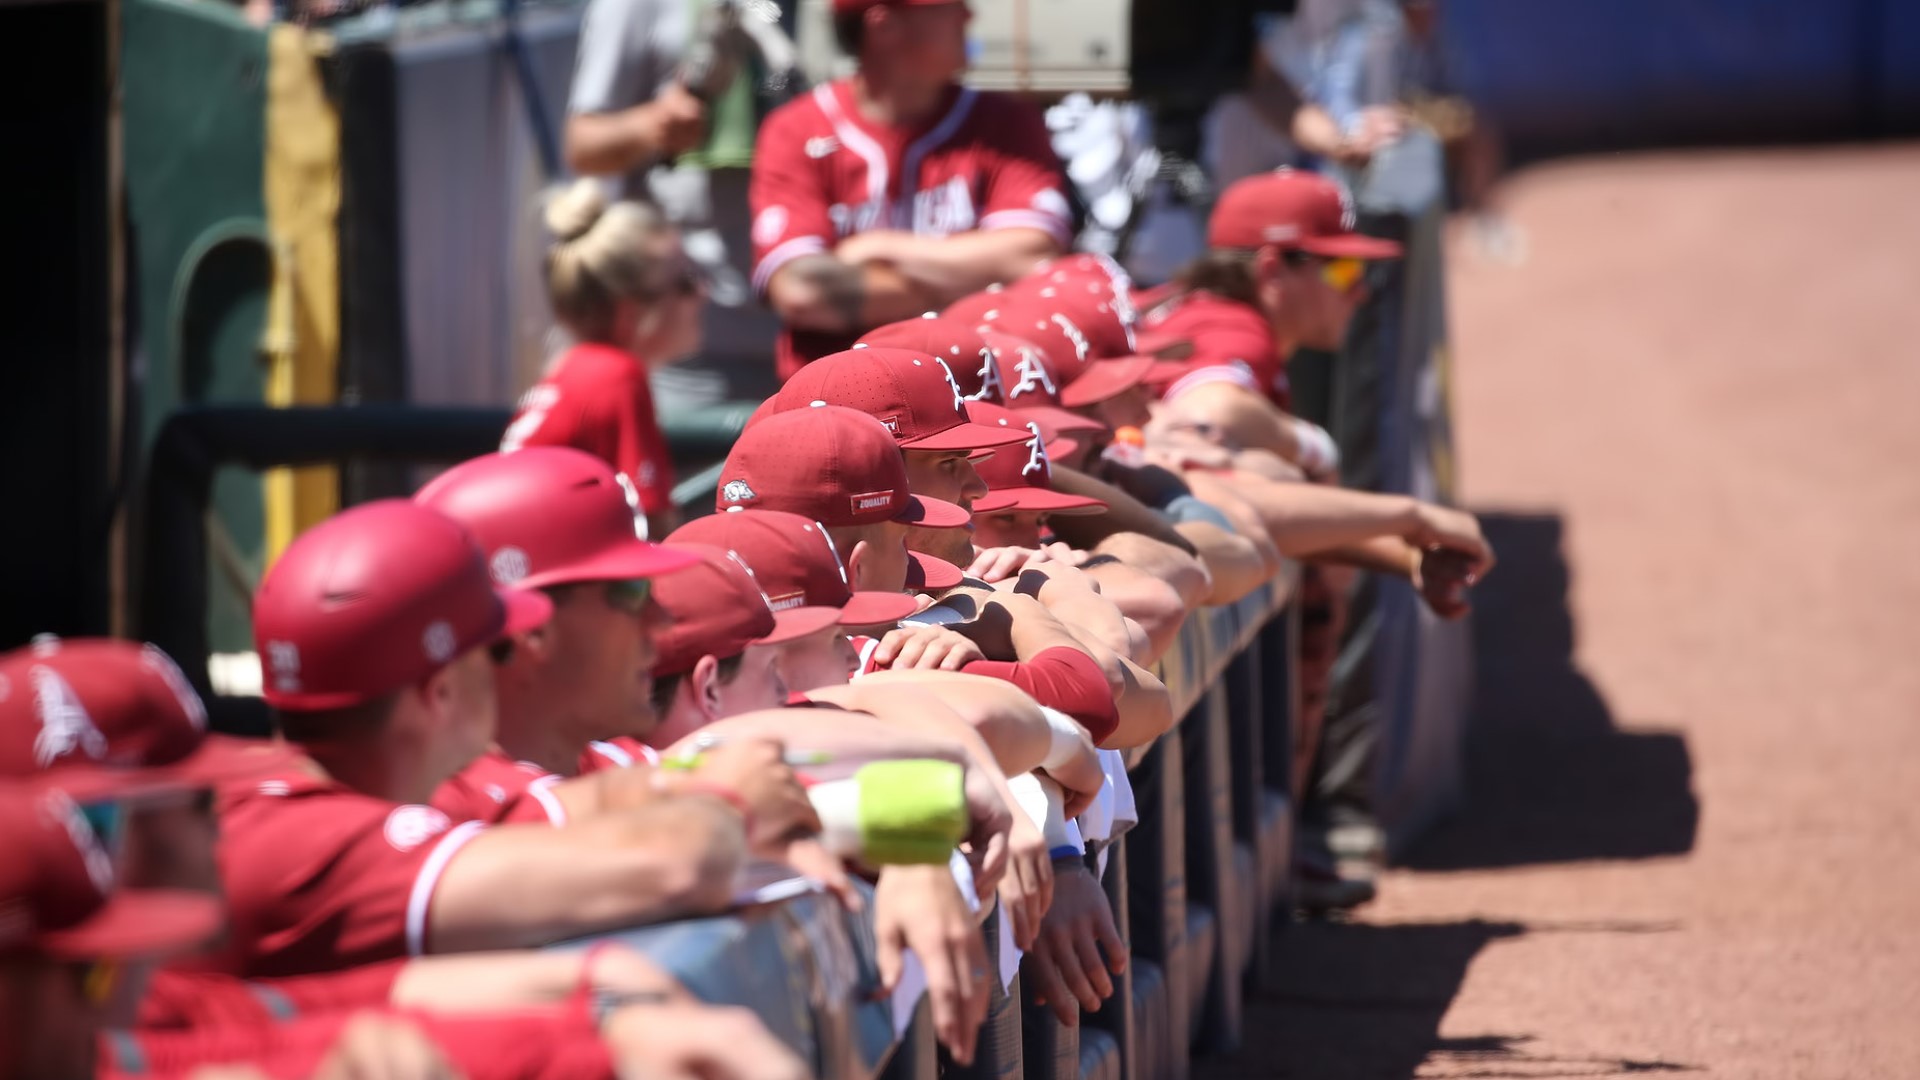 The No. 1 overall seed for the first time in program history, Arkansas will open against NJIT Friday, June 4 at 2 p.m. inside Baum-Walker Stadium.